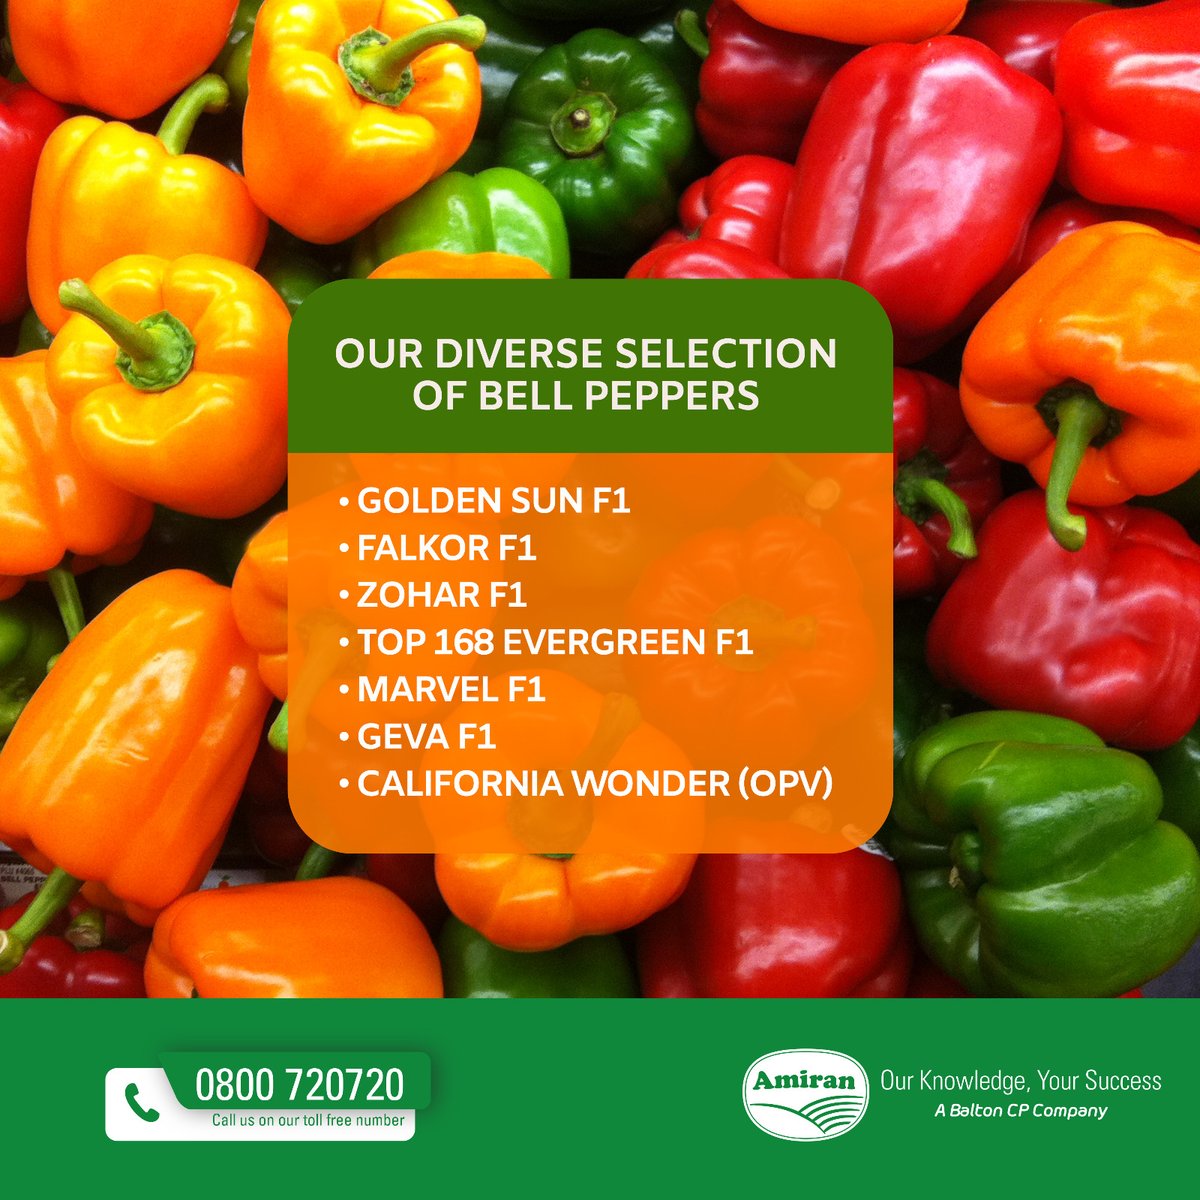 Looking for the perfect sweet pepper to grow this season? Amiran has a diverse selection of bell peppers to suit every farmer’s needs! Call us free today 0800720720! Our agronomic team is available to discuss your specific needs and recommend the most suitable bell pepper.